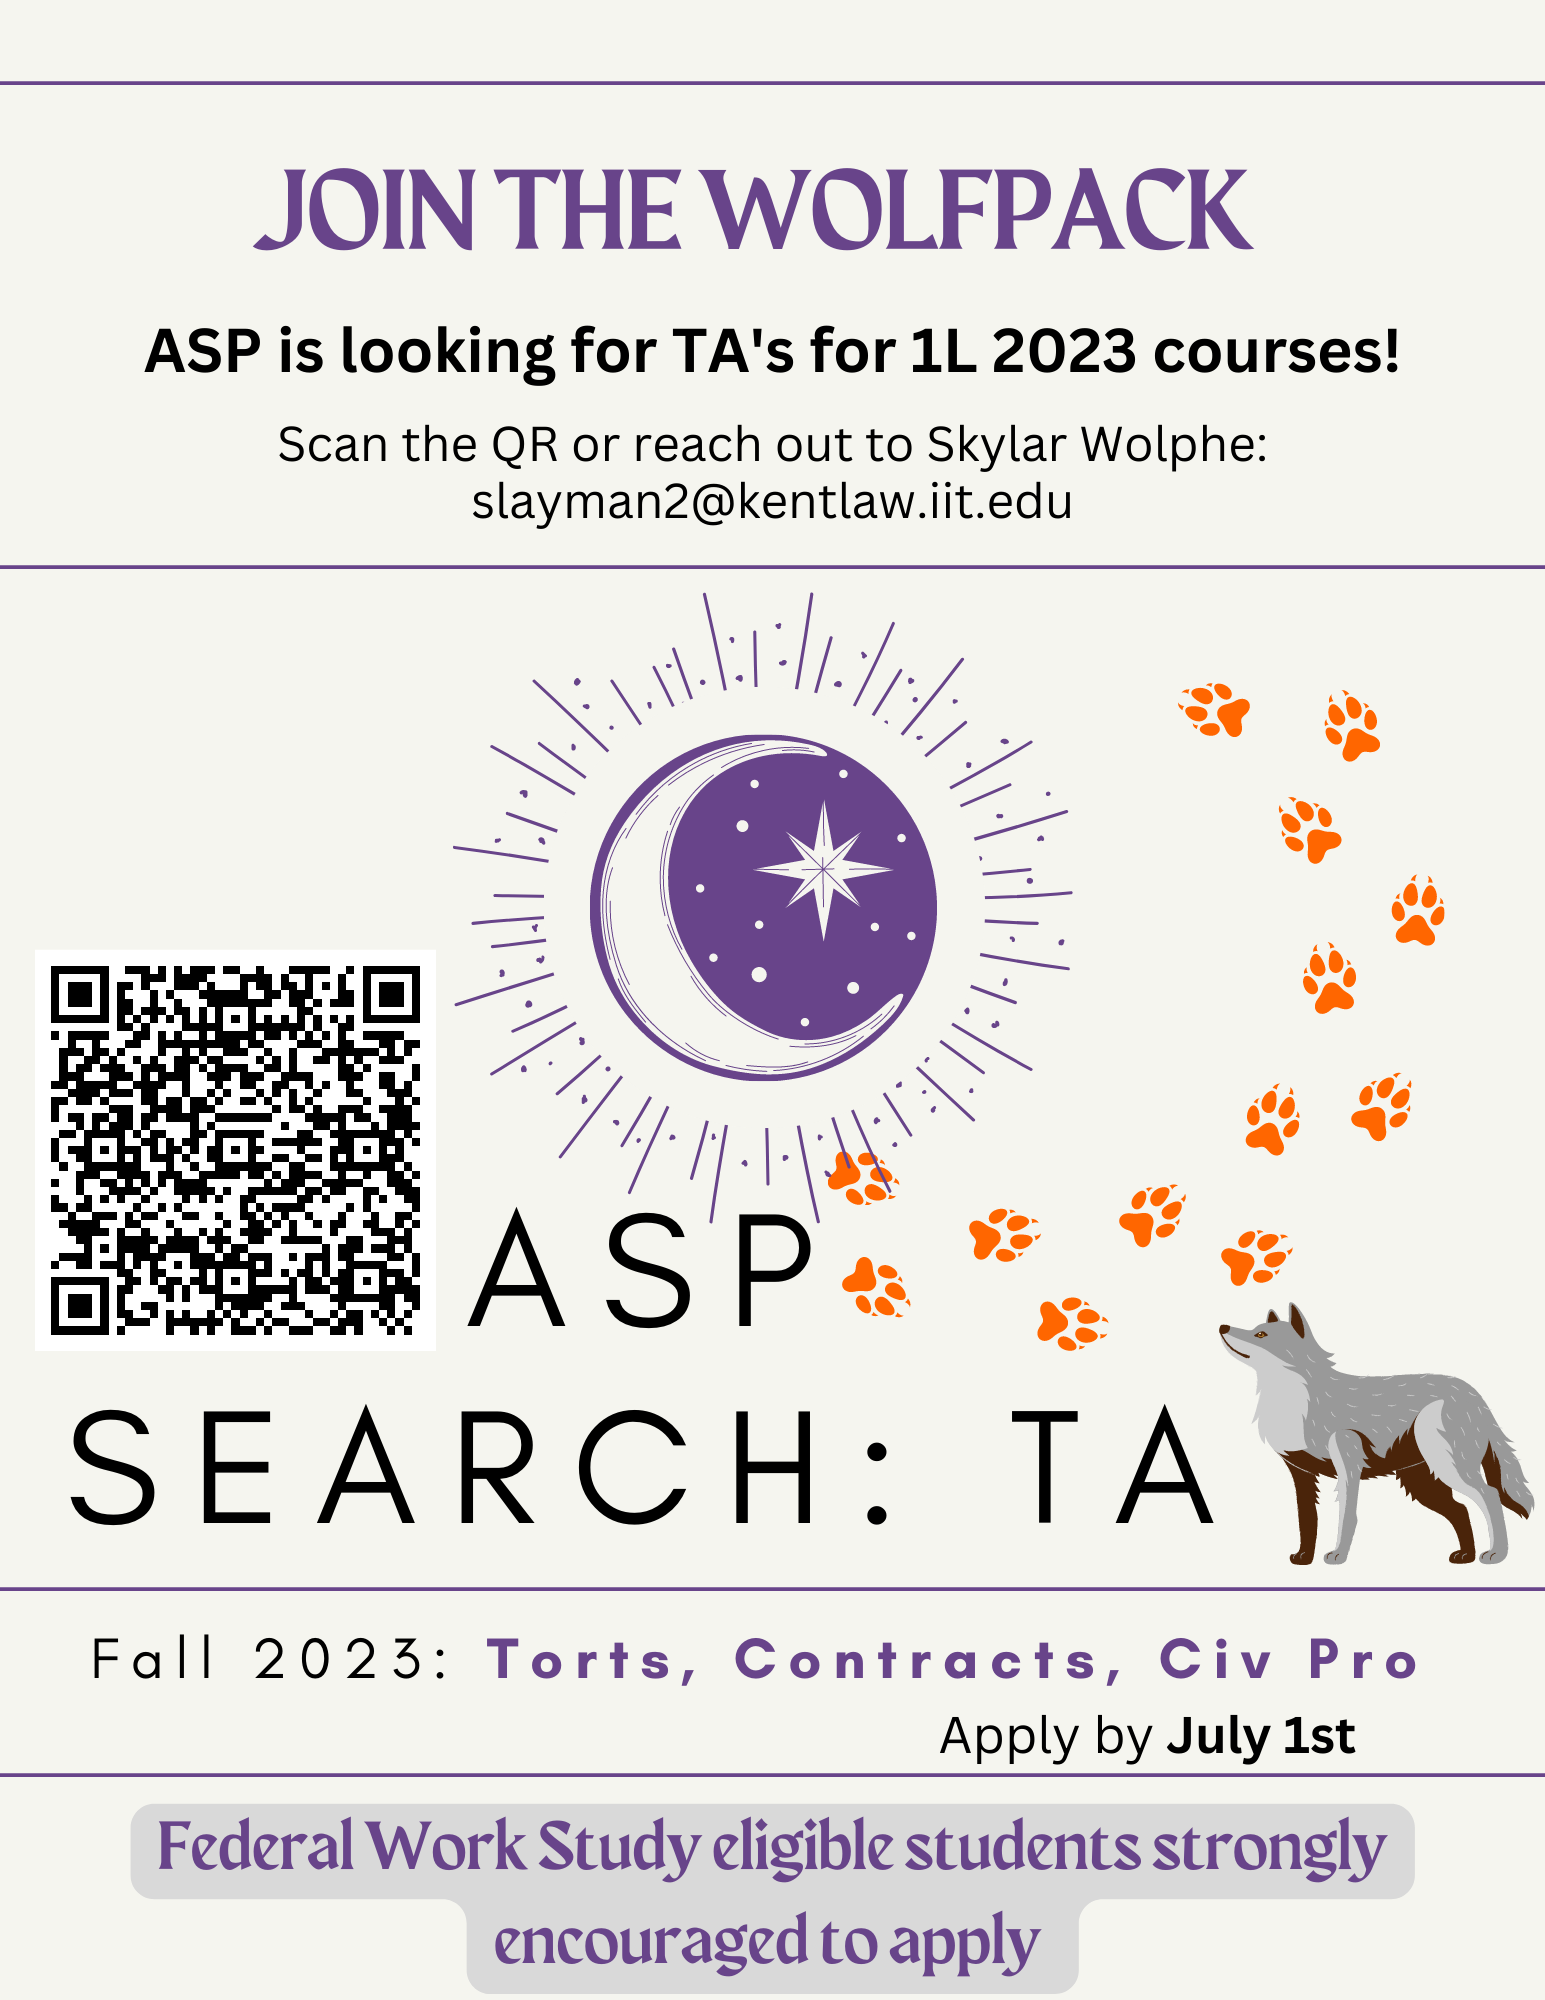 A poster with a moon and pawprints that says "Join the Wolfpack!" and encourages Federal Workstudy Eligible students to apply. Clicknig the poster takes you to the google form application